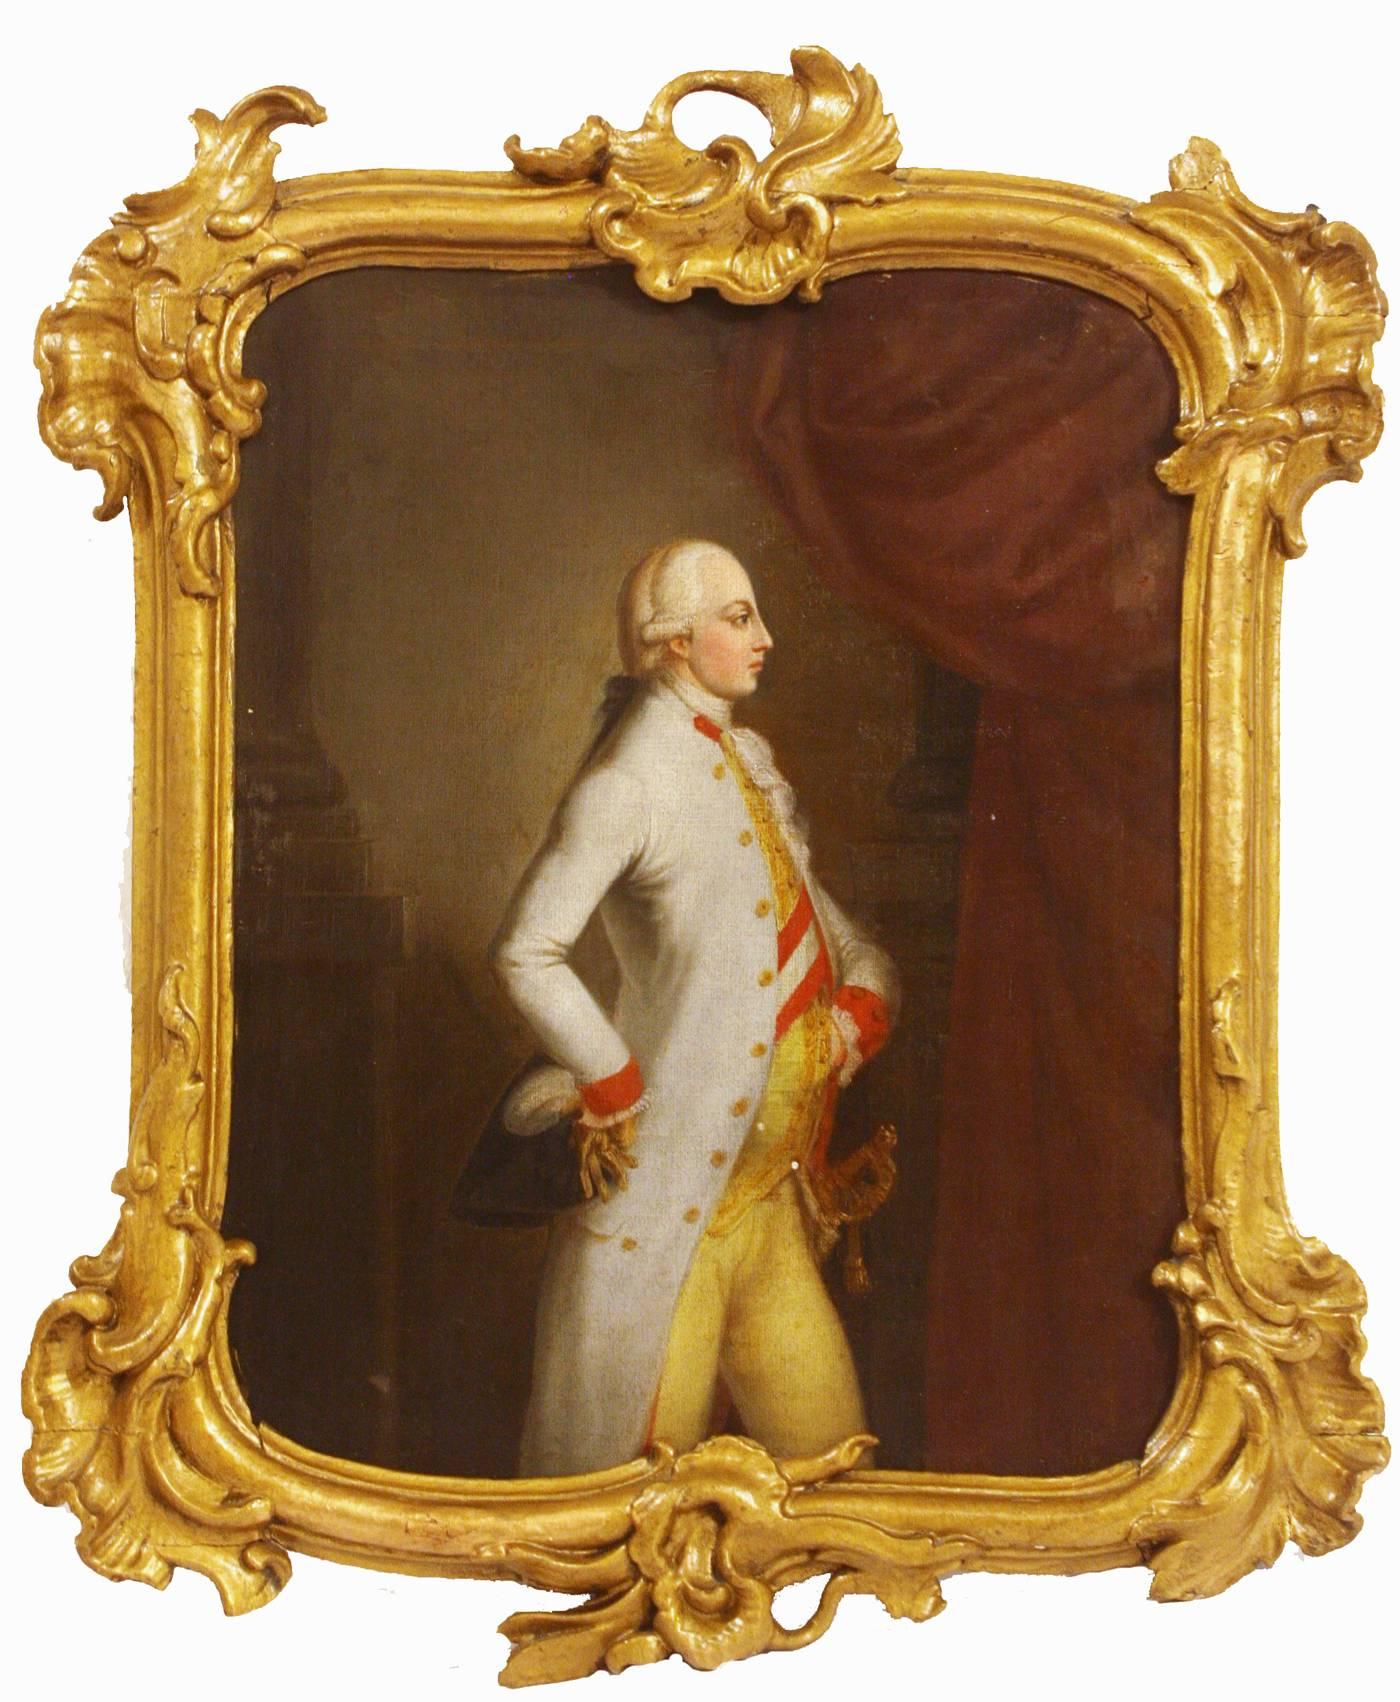 Pair of 18th century portraits in period Rococo frames, relined, Joseph II was Holy Roman Emperor from 1765-1790, ruler of the Habsburg lands from 1780-1790, eldest son of Empress Maria Theresa and her husband Francis I, Leopold and Joseph II were